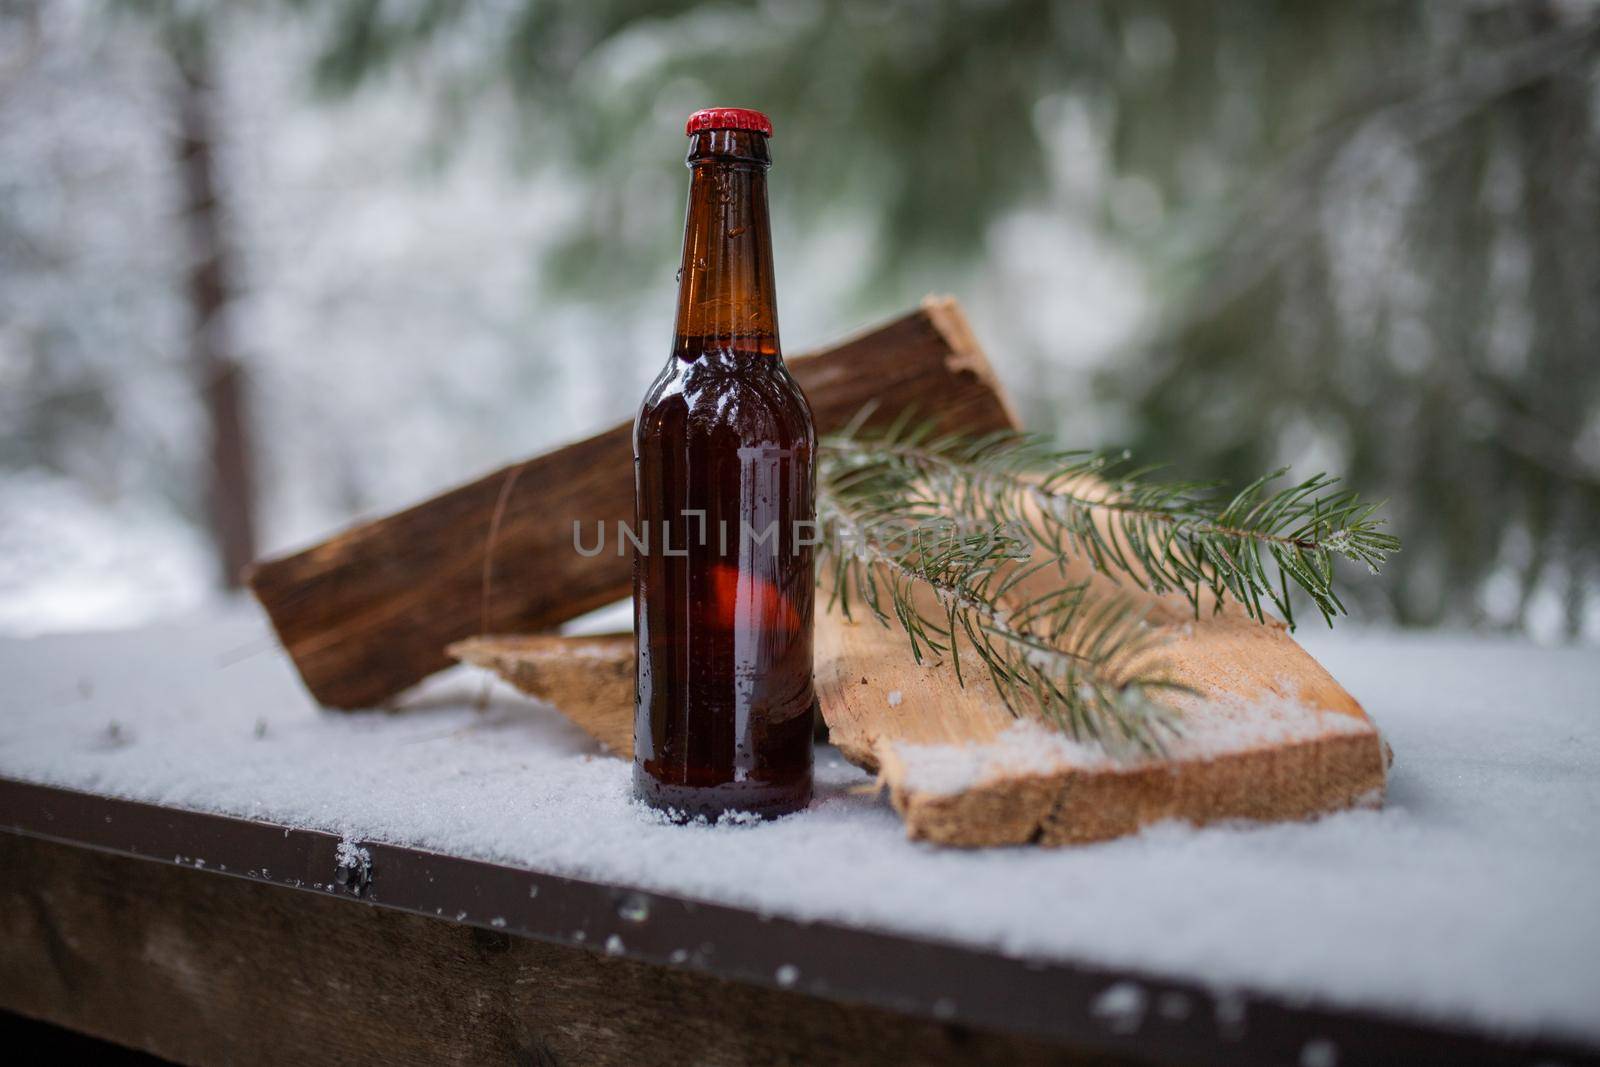 Bottle of beer, wood planks, and pine leaves on a snow-covered table with blurry forest as background. Bottle of alcoholic beverage and snowy pine trees. Winter still life photography